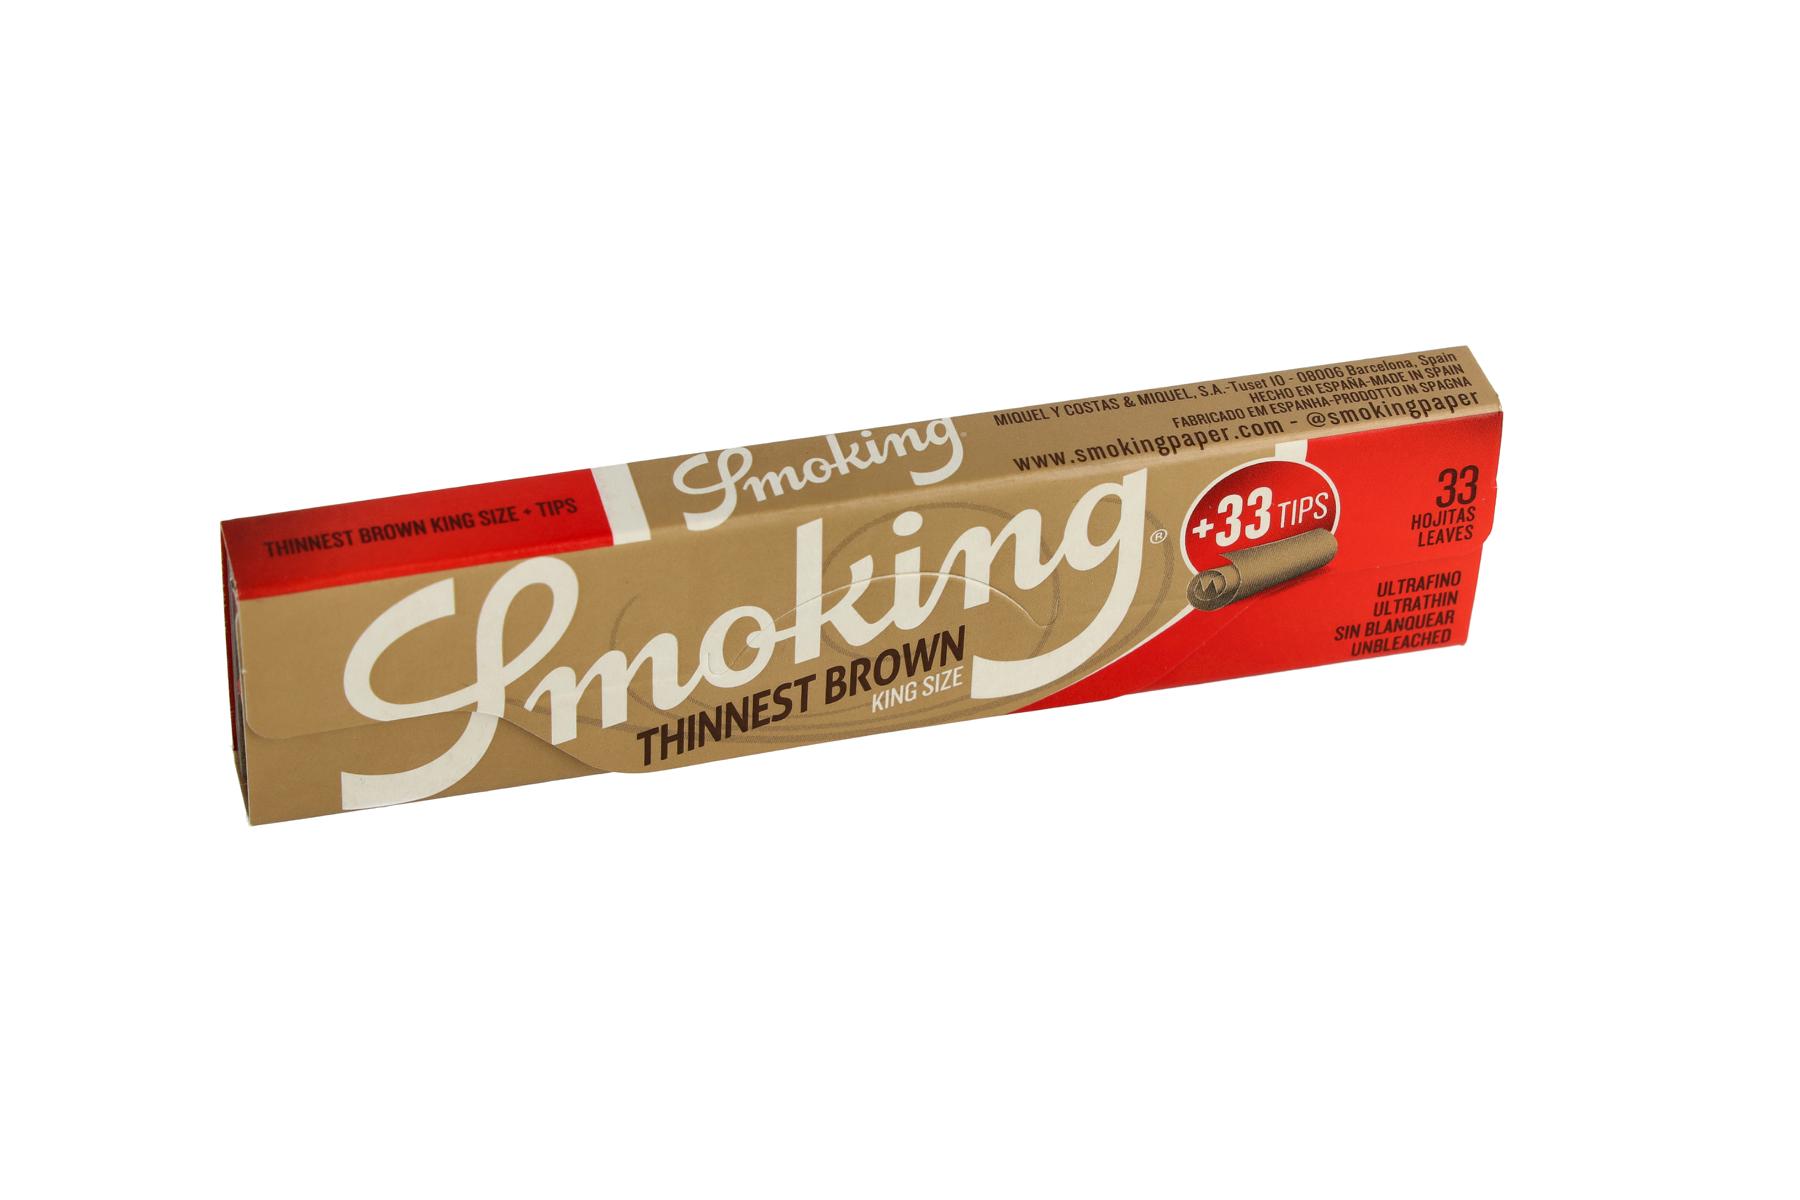 Smoking Thinnest Brown King Size + Tips